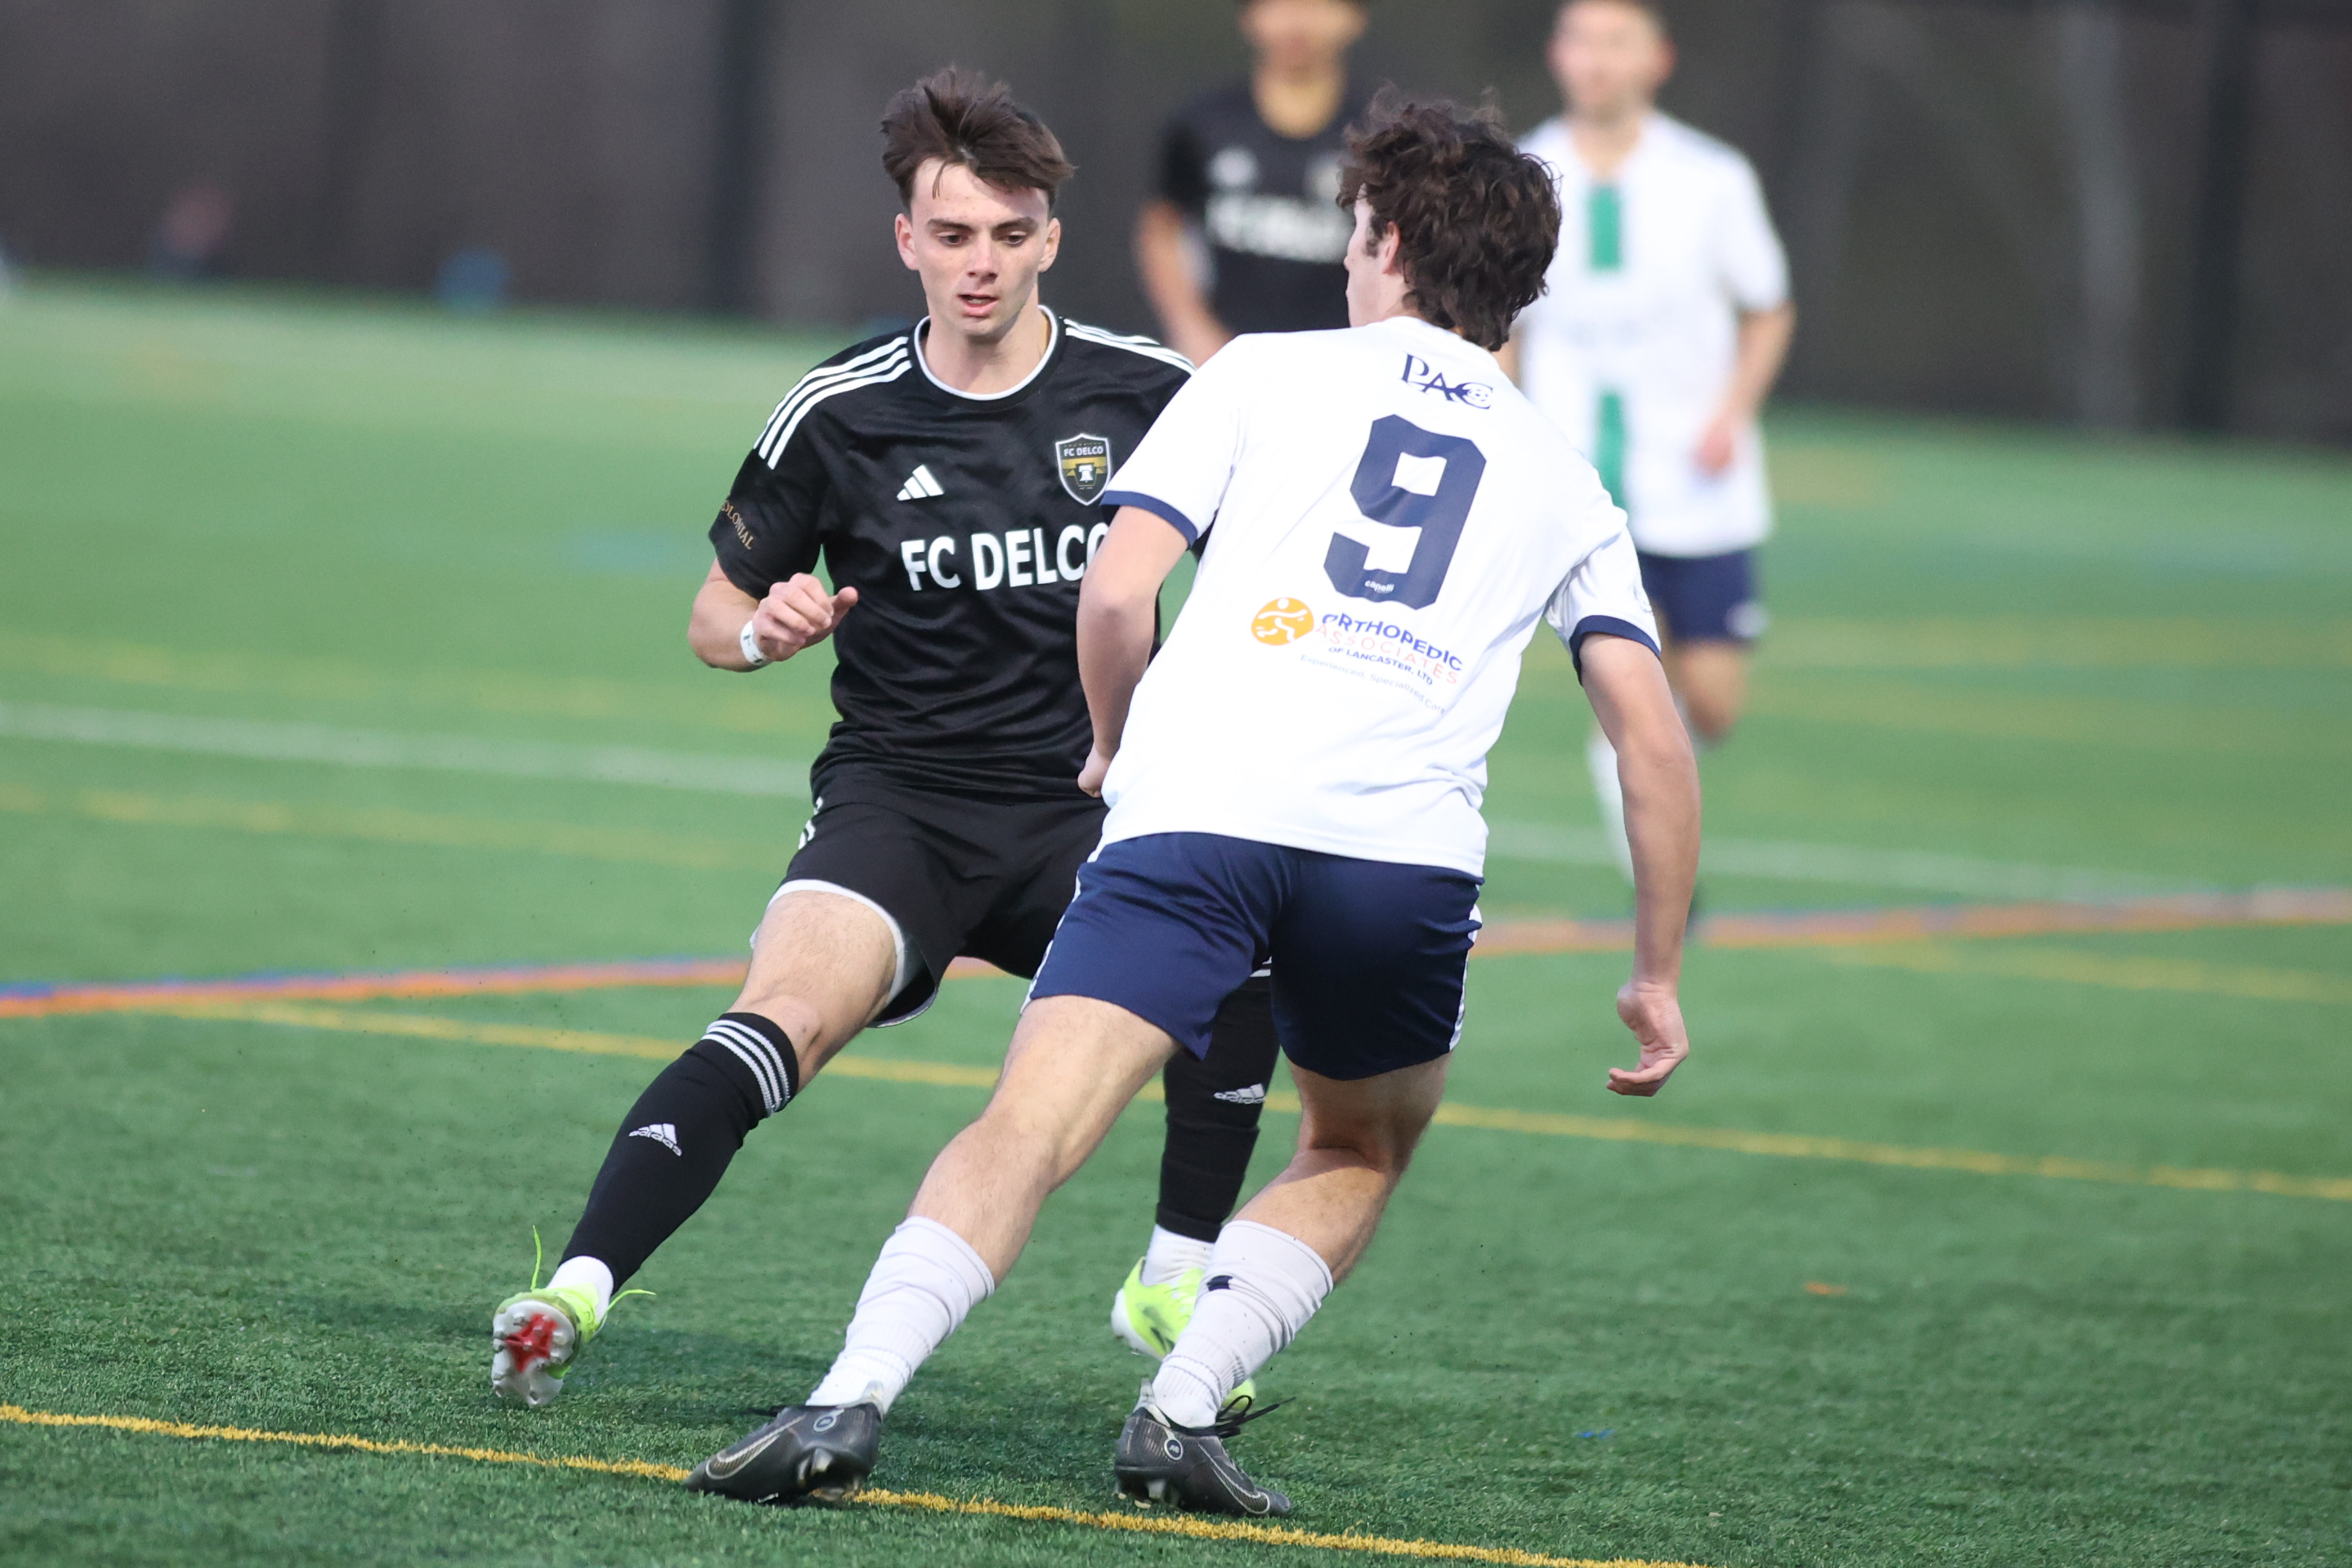 <span class="pn-tooltip pn-player-link">
        <span class="name-pointer">MLS Next: FC Delco has strong showing against PA Classics</span>
        <span class="info-box not-prose" style="background: linear-gradient(to bottom, rgba(212,175,55, 0.95) 0%,rgba(212,175,55, 1) 100%)">
            <a href="https://prepsoccer.com/2024/03/mls-next-fc-delco-has-strong-showing-against-pa-classics/" class="link-wrap">
                                    <span class="player-img"><img src="https://prepsoccer.com/wp-content/uploads/sites/8/2024/03/caprettoclassics.jpg?w=150&h=150&crop=1" alt="MLS Next: FC Delco has strong showing against PA Classics"></span>
                
                <span class="player-details">
                    <span class="first-name">MLS</span>
                    <span class="last-name">Next: FC Delco has strong showing against PA Classics</span>
                    <span class="measurables">
                                            </span>
                                    </span>
                <span class="player-rank">
                                                        </span>
                                    <span class="state-abbr"></span>
                            </a>

            
        </span>
    </span>
